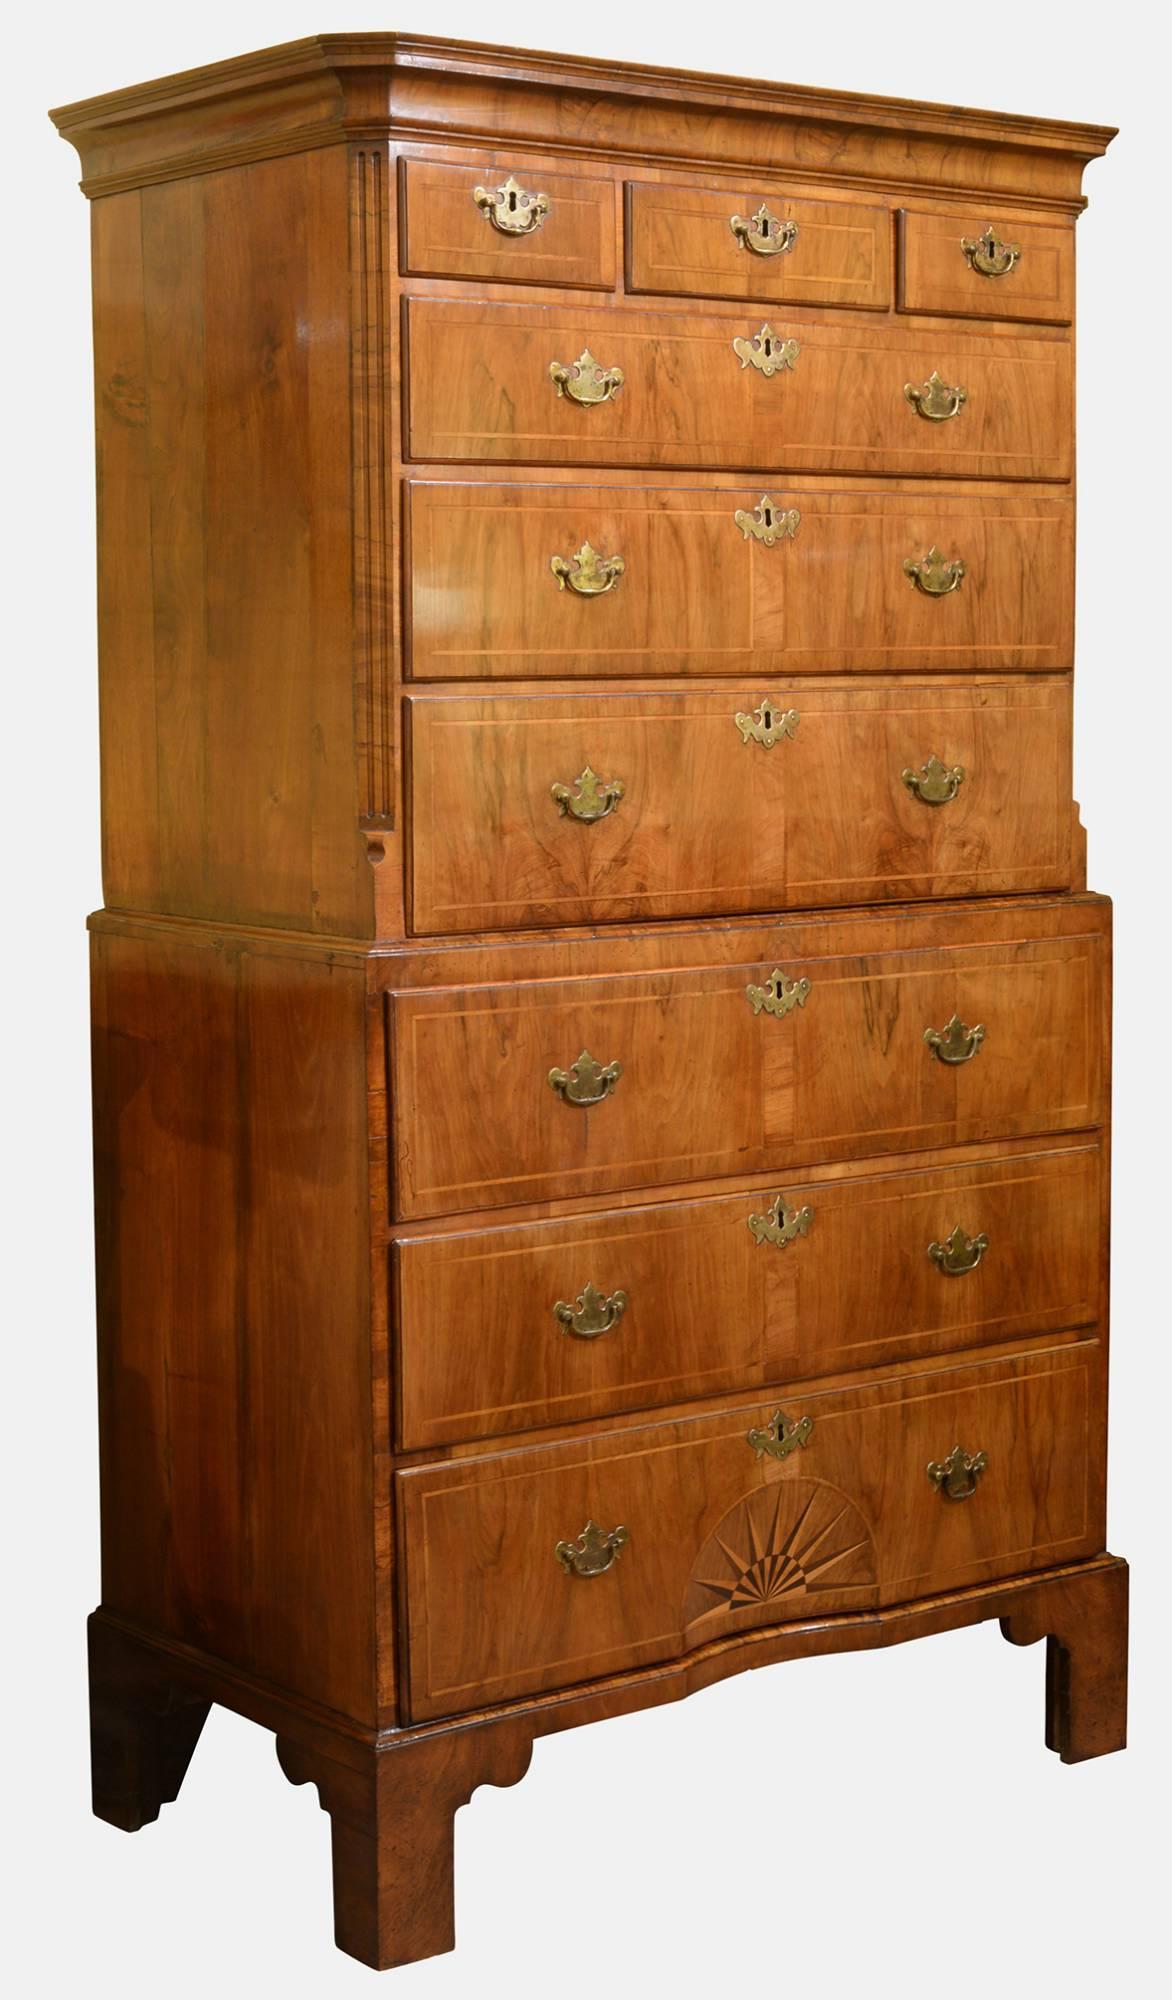 A fine and rare George II walnut secretaire chest on chest with fluted canted corners. The drawer fronts inlaid with a narrow walnut band, the bottom drawer further inlaid with a concave sunburst. The writing drawer stepped and shaped, fitted